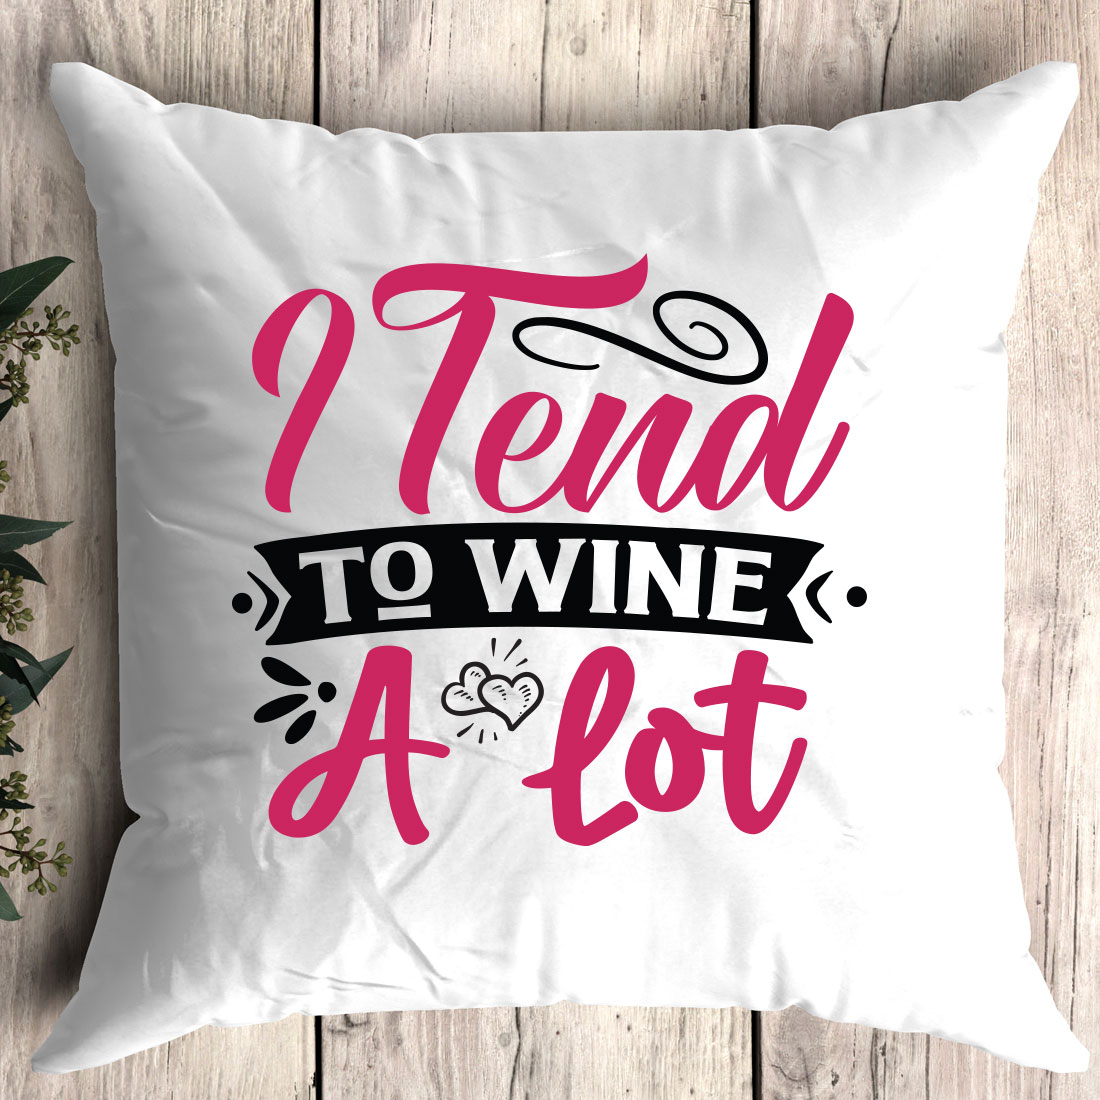 White pillow with the words tend to wine a lot on it.